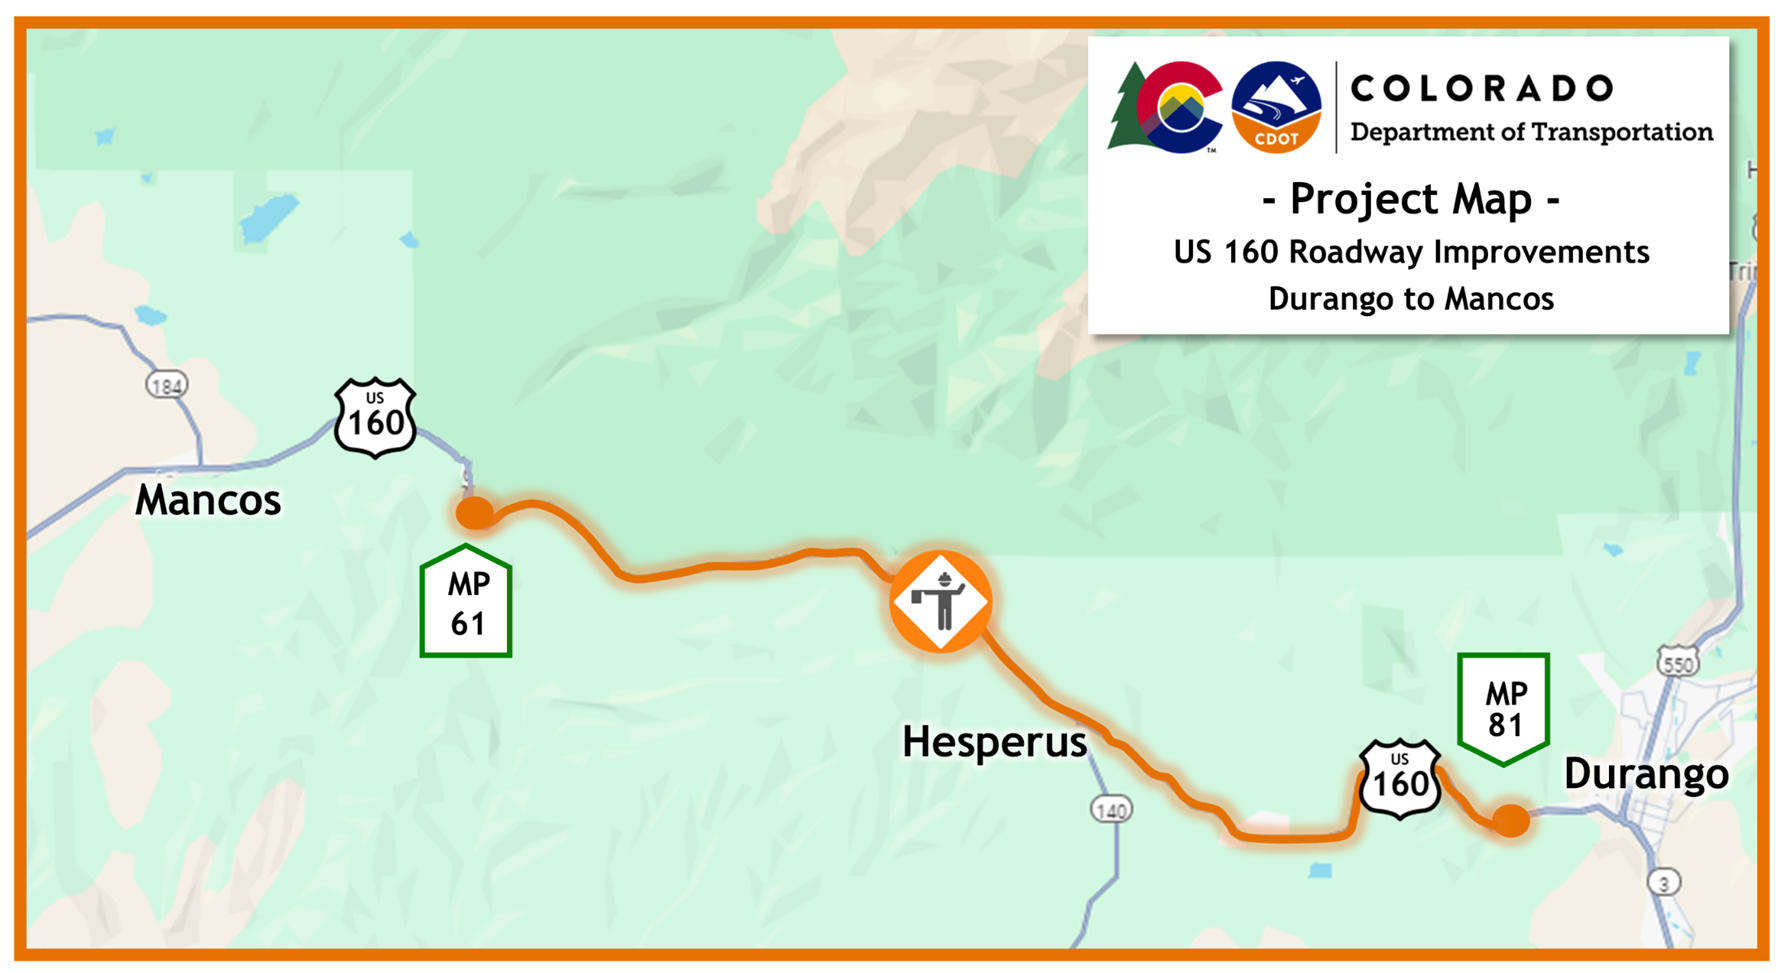 US 160 Roadway Improvements Project Map between Durango and Mancos.png detail image